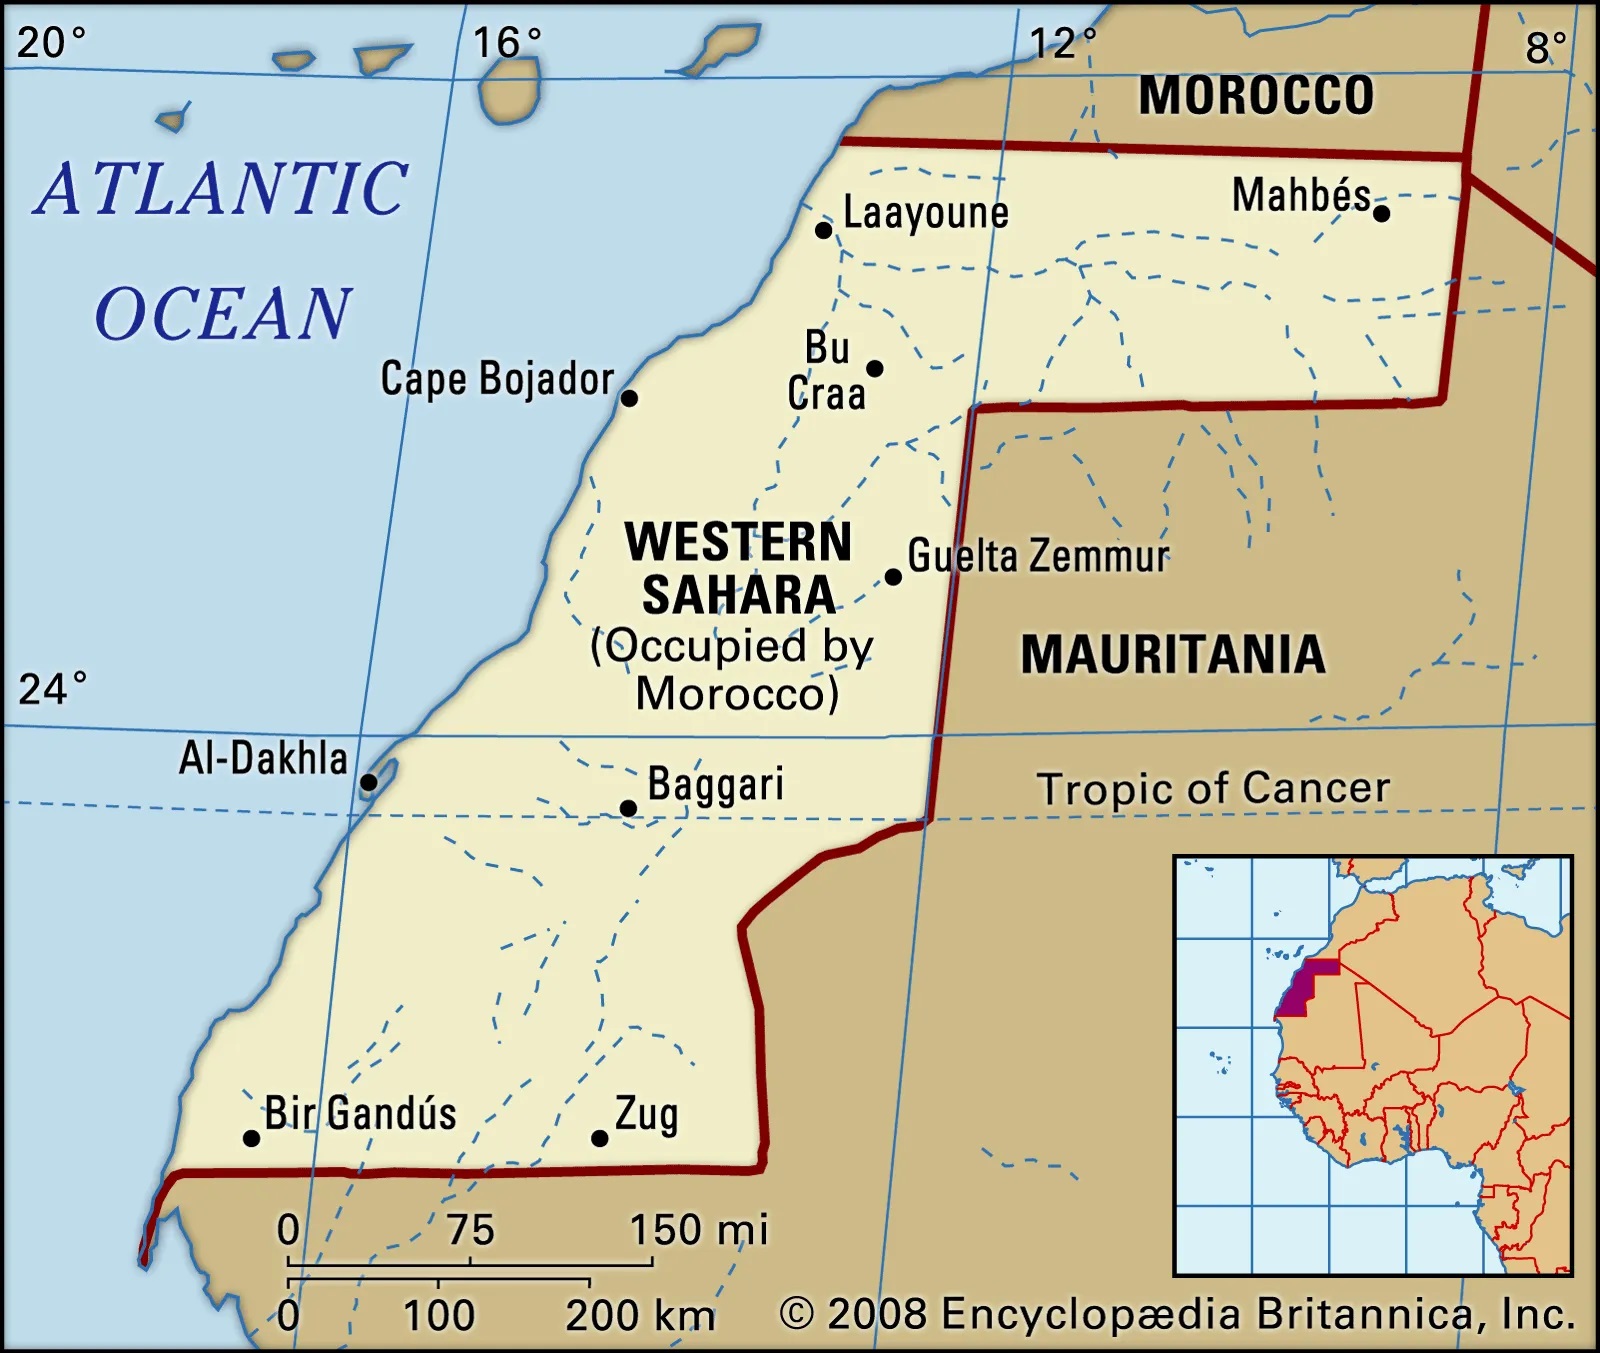 Spain Abandons Former Colony in the Western Sahara Endorsing Morocco Domination